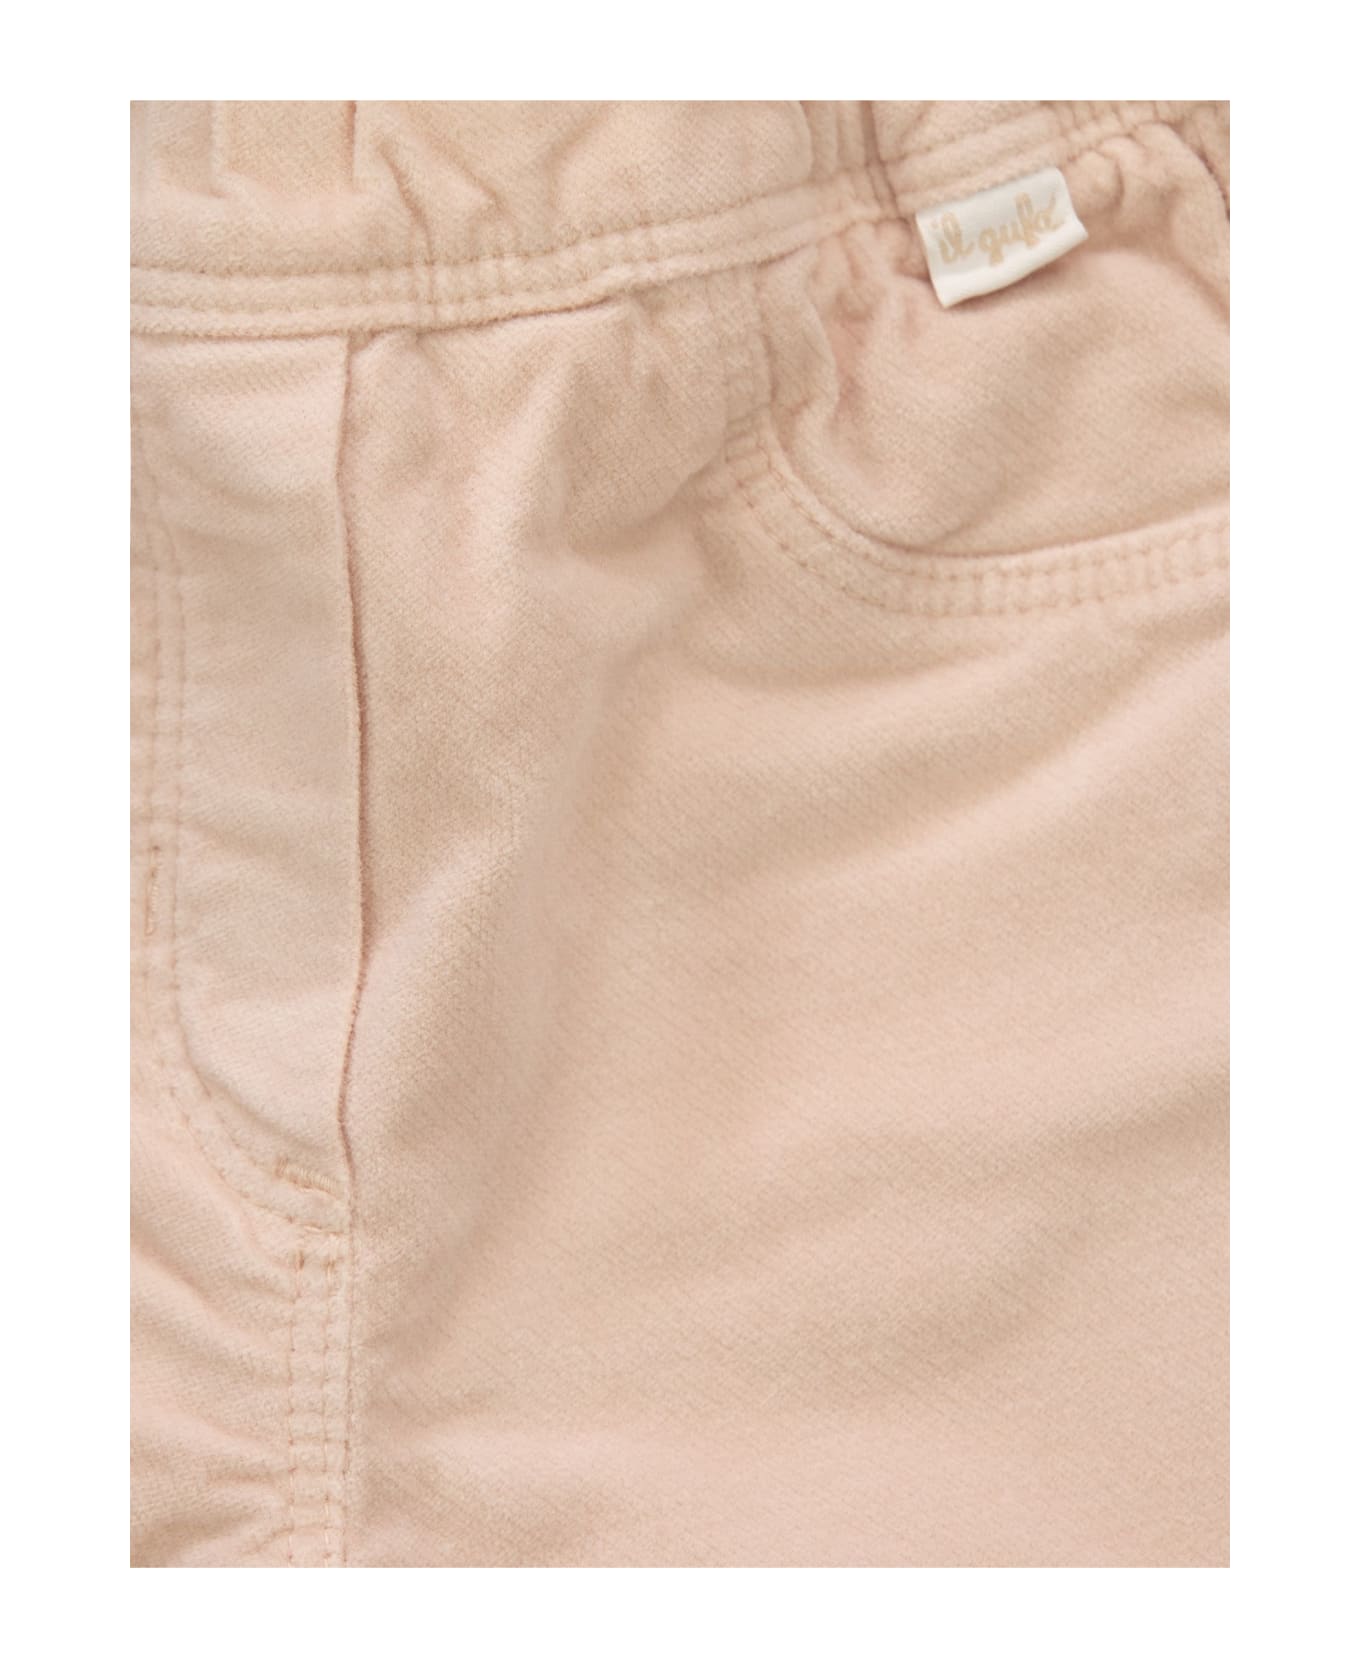 Il Gufo 5-pocket Trousers With Elastic - Pink